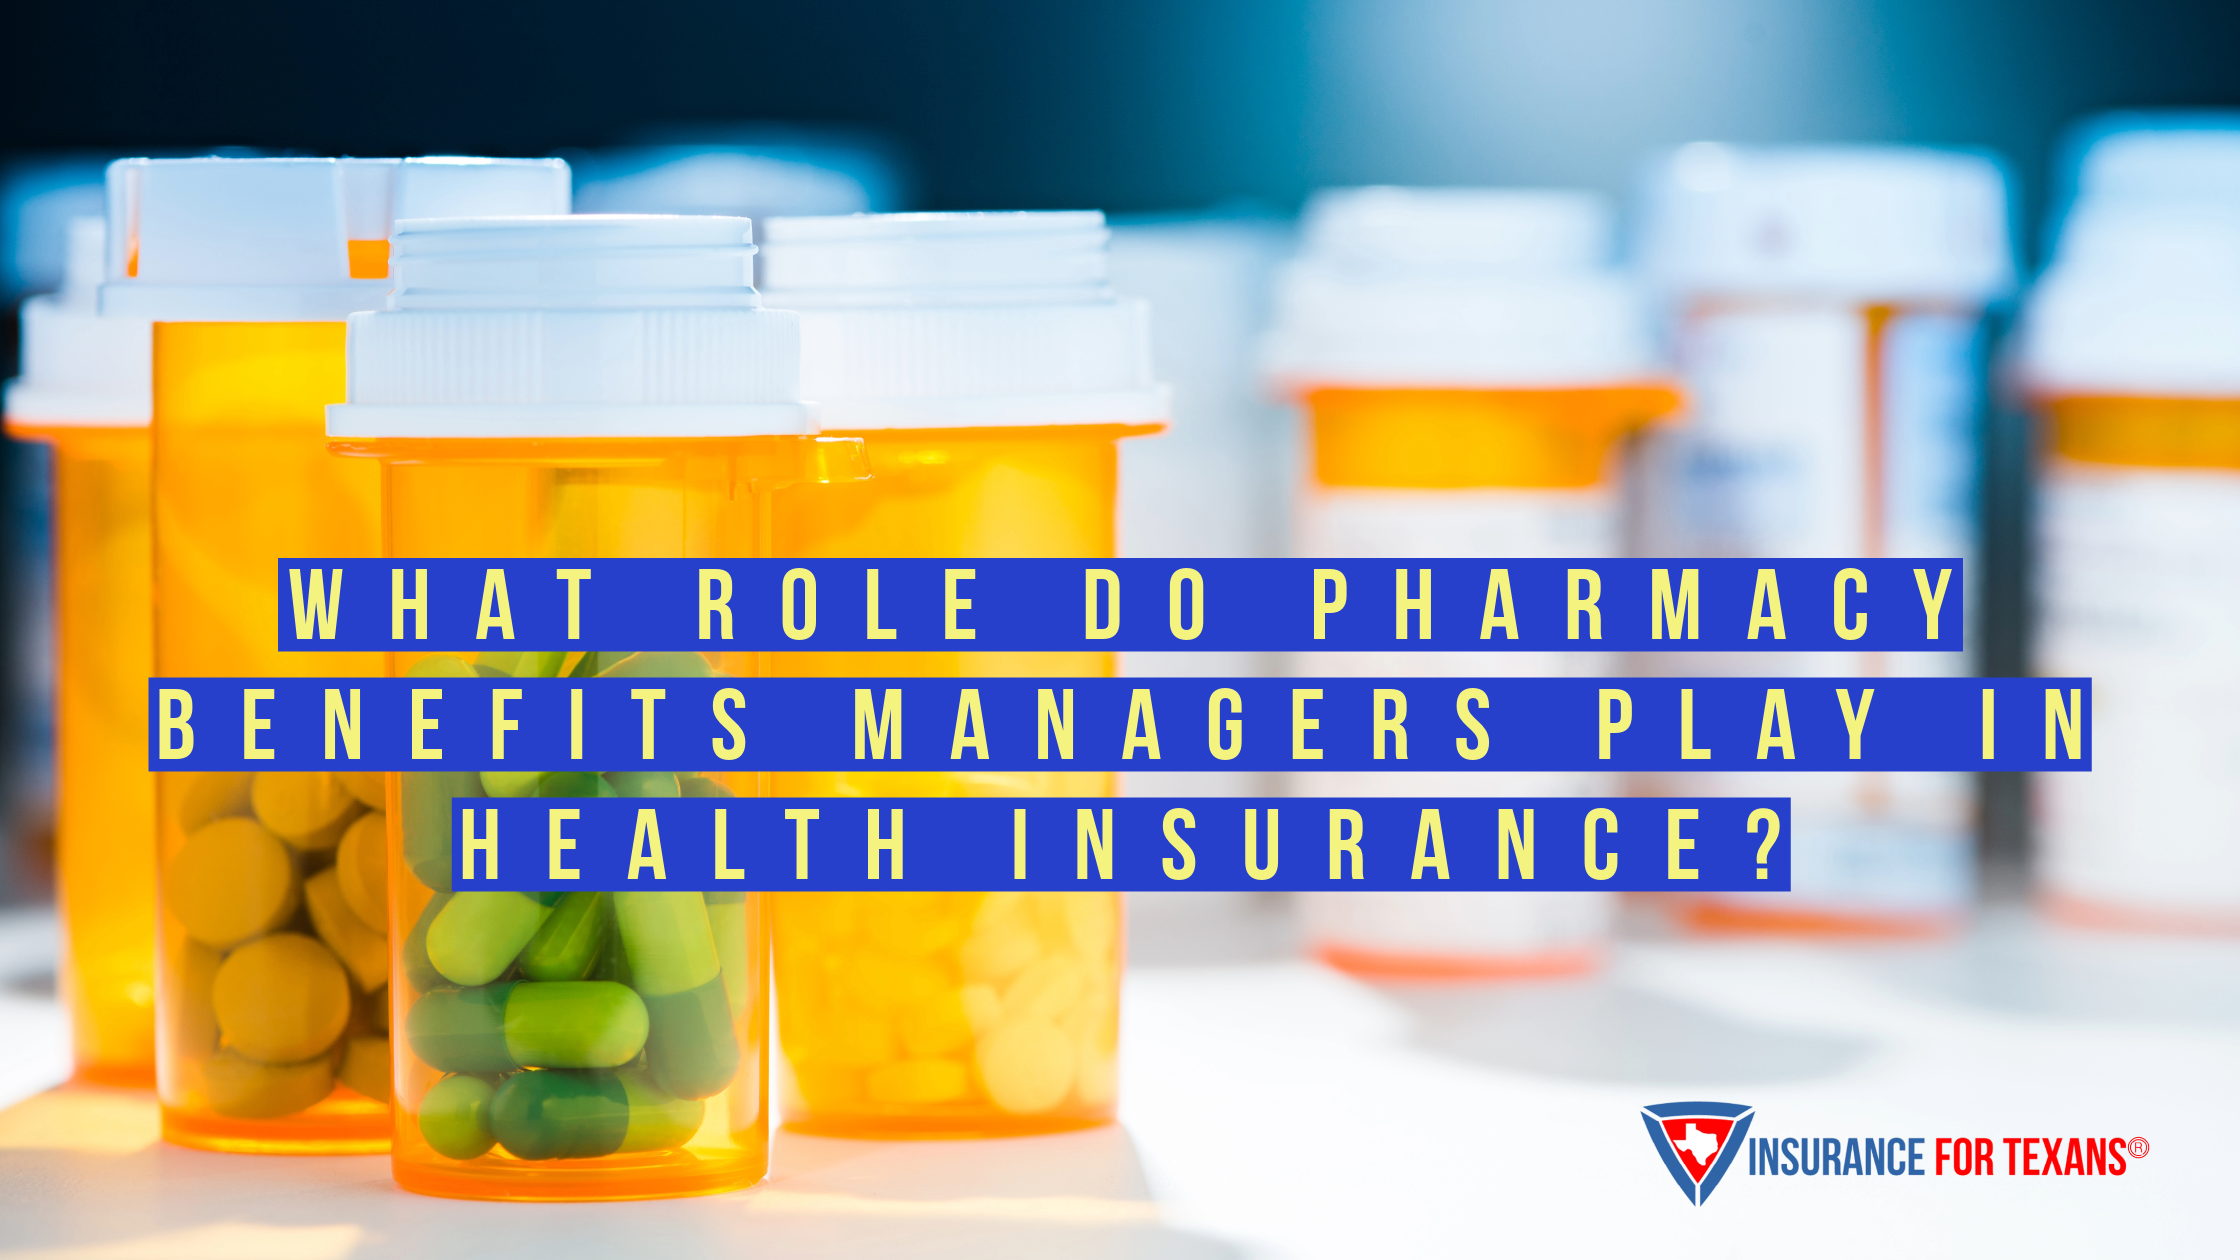 What Role Do Pharmacy Benefits Managers Play In Health Insurance?